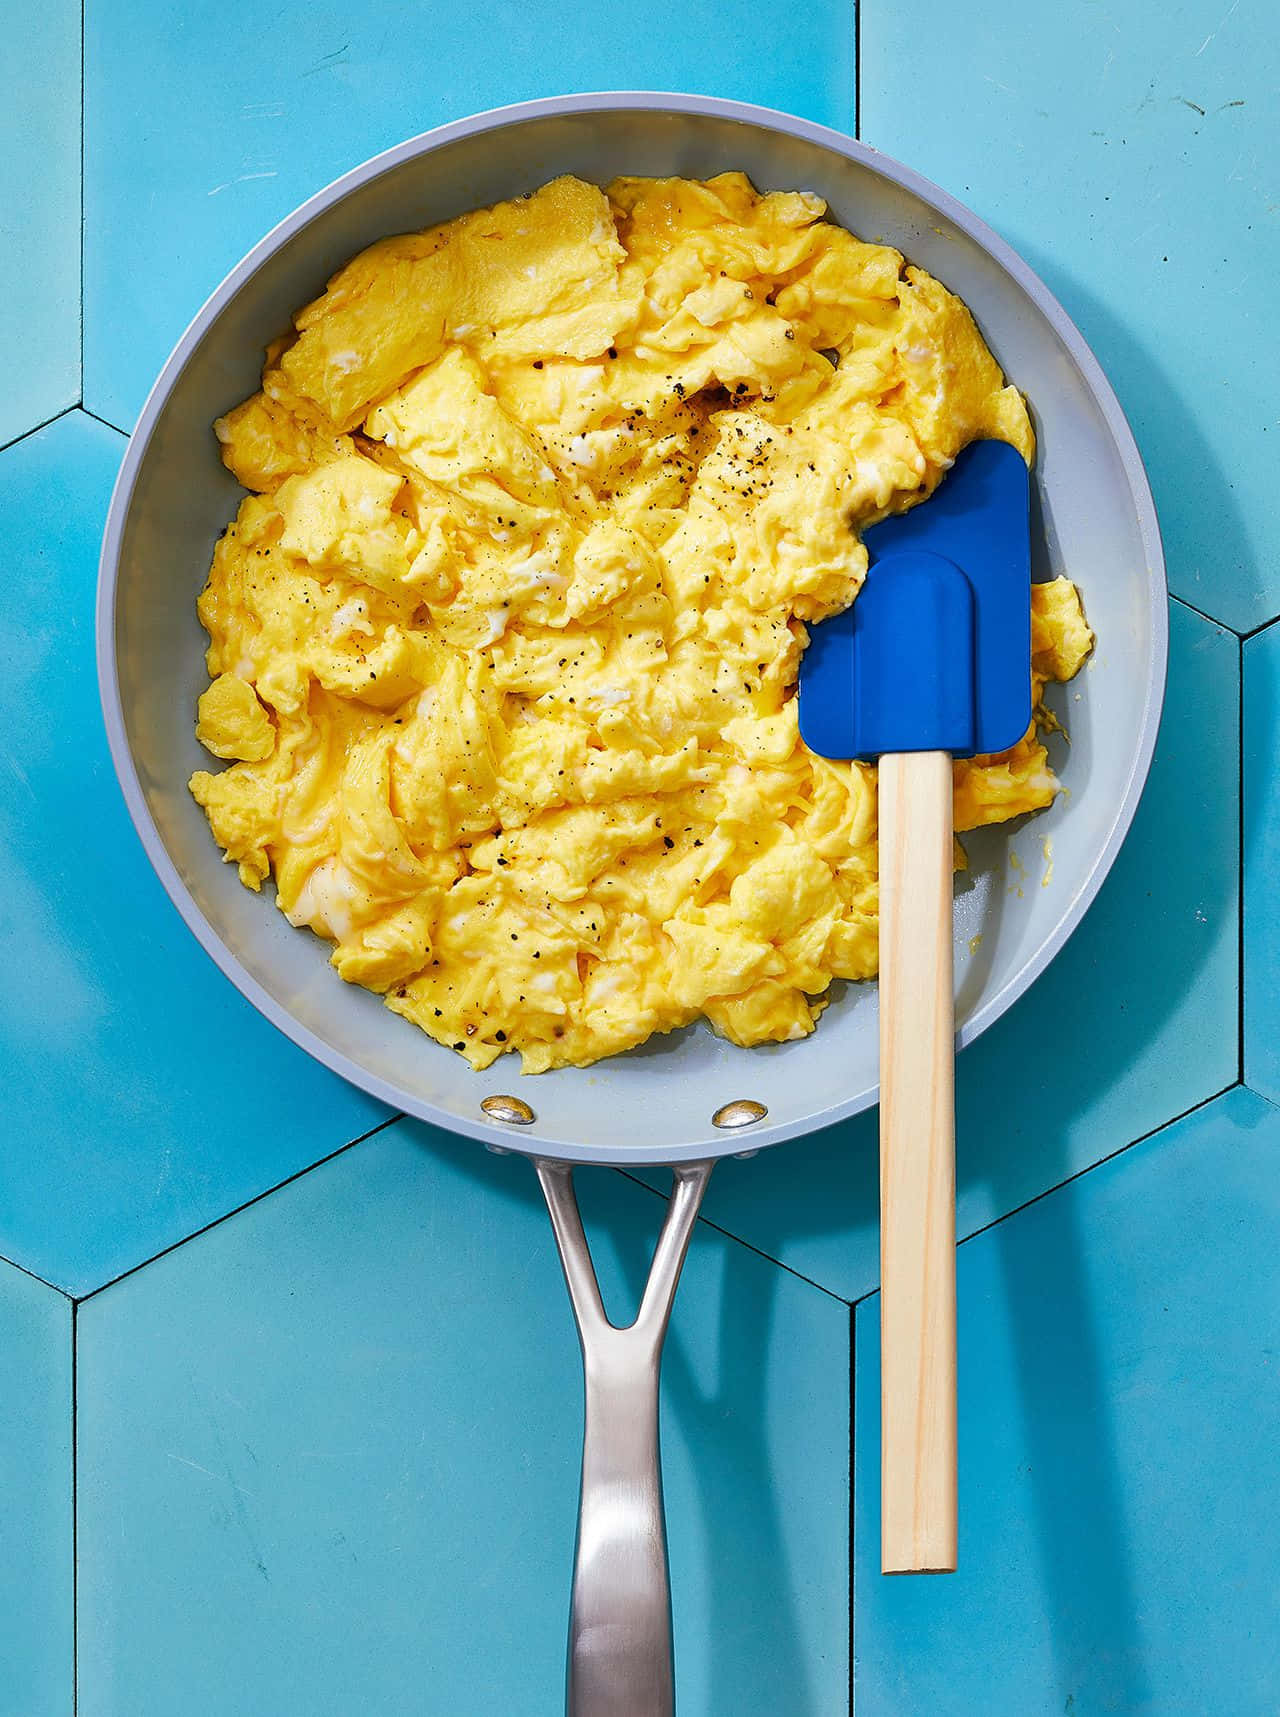 Deliciously Scrambled Eggs Can Make Any Morning Better